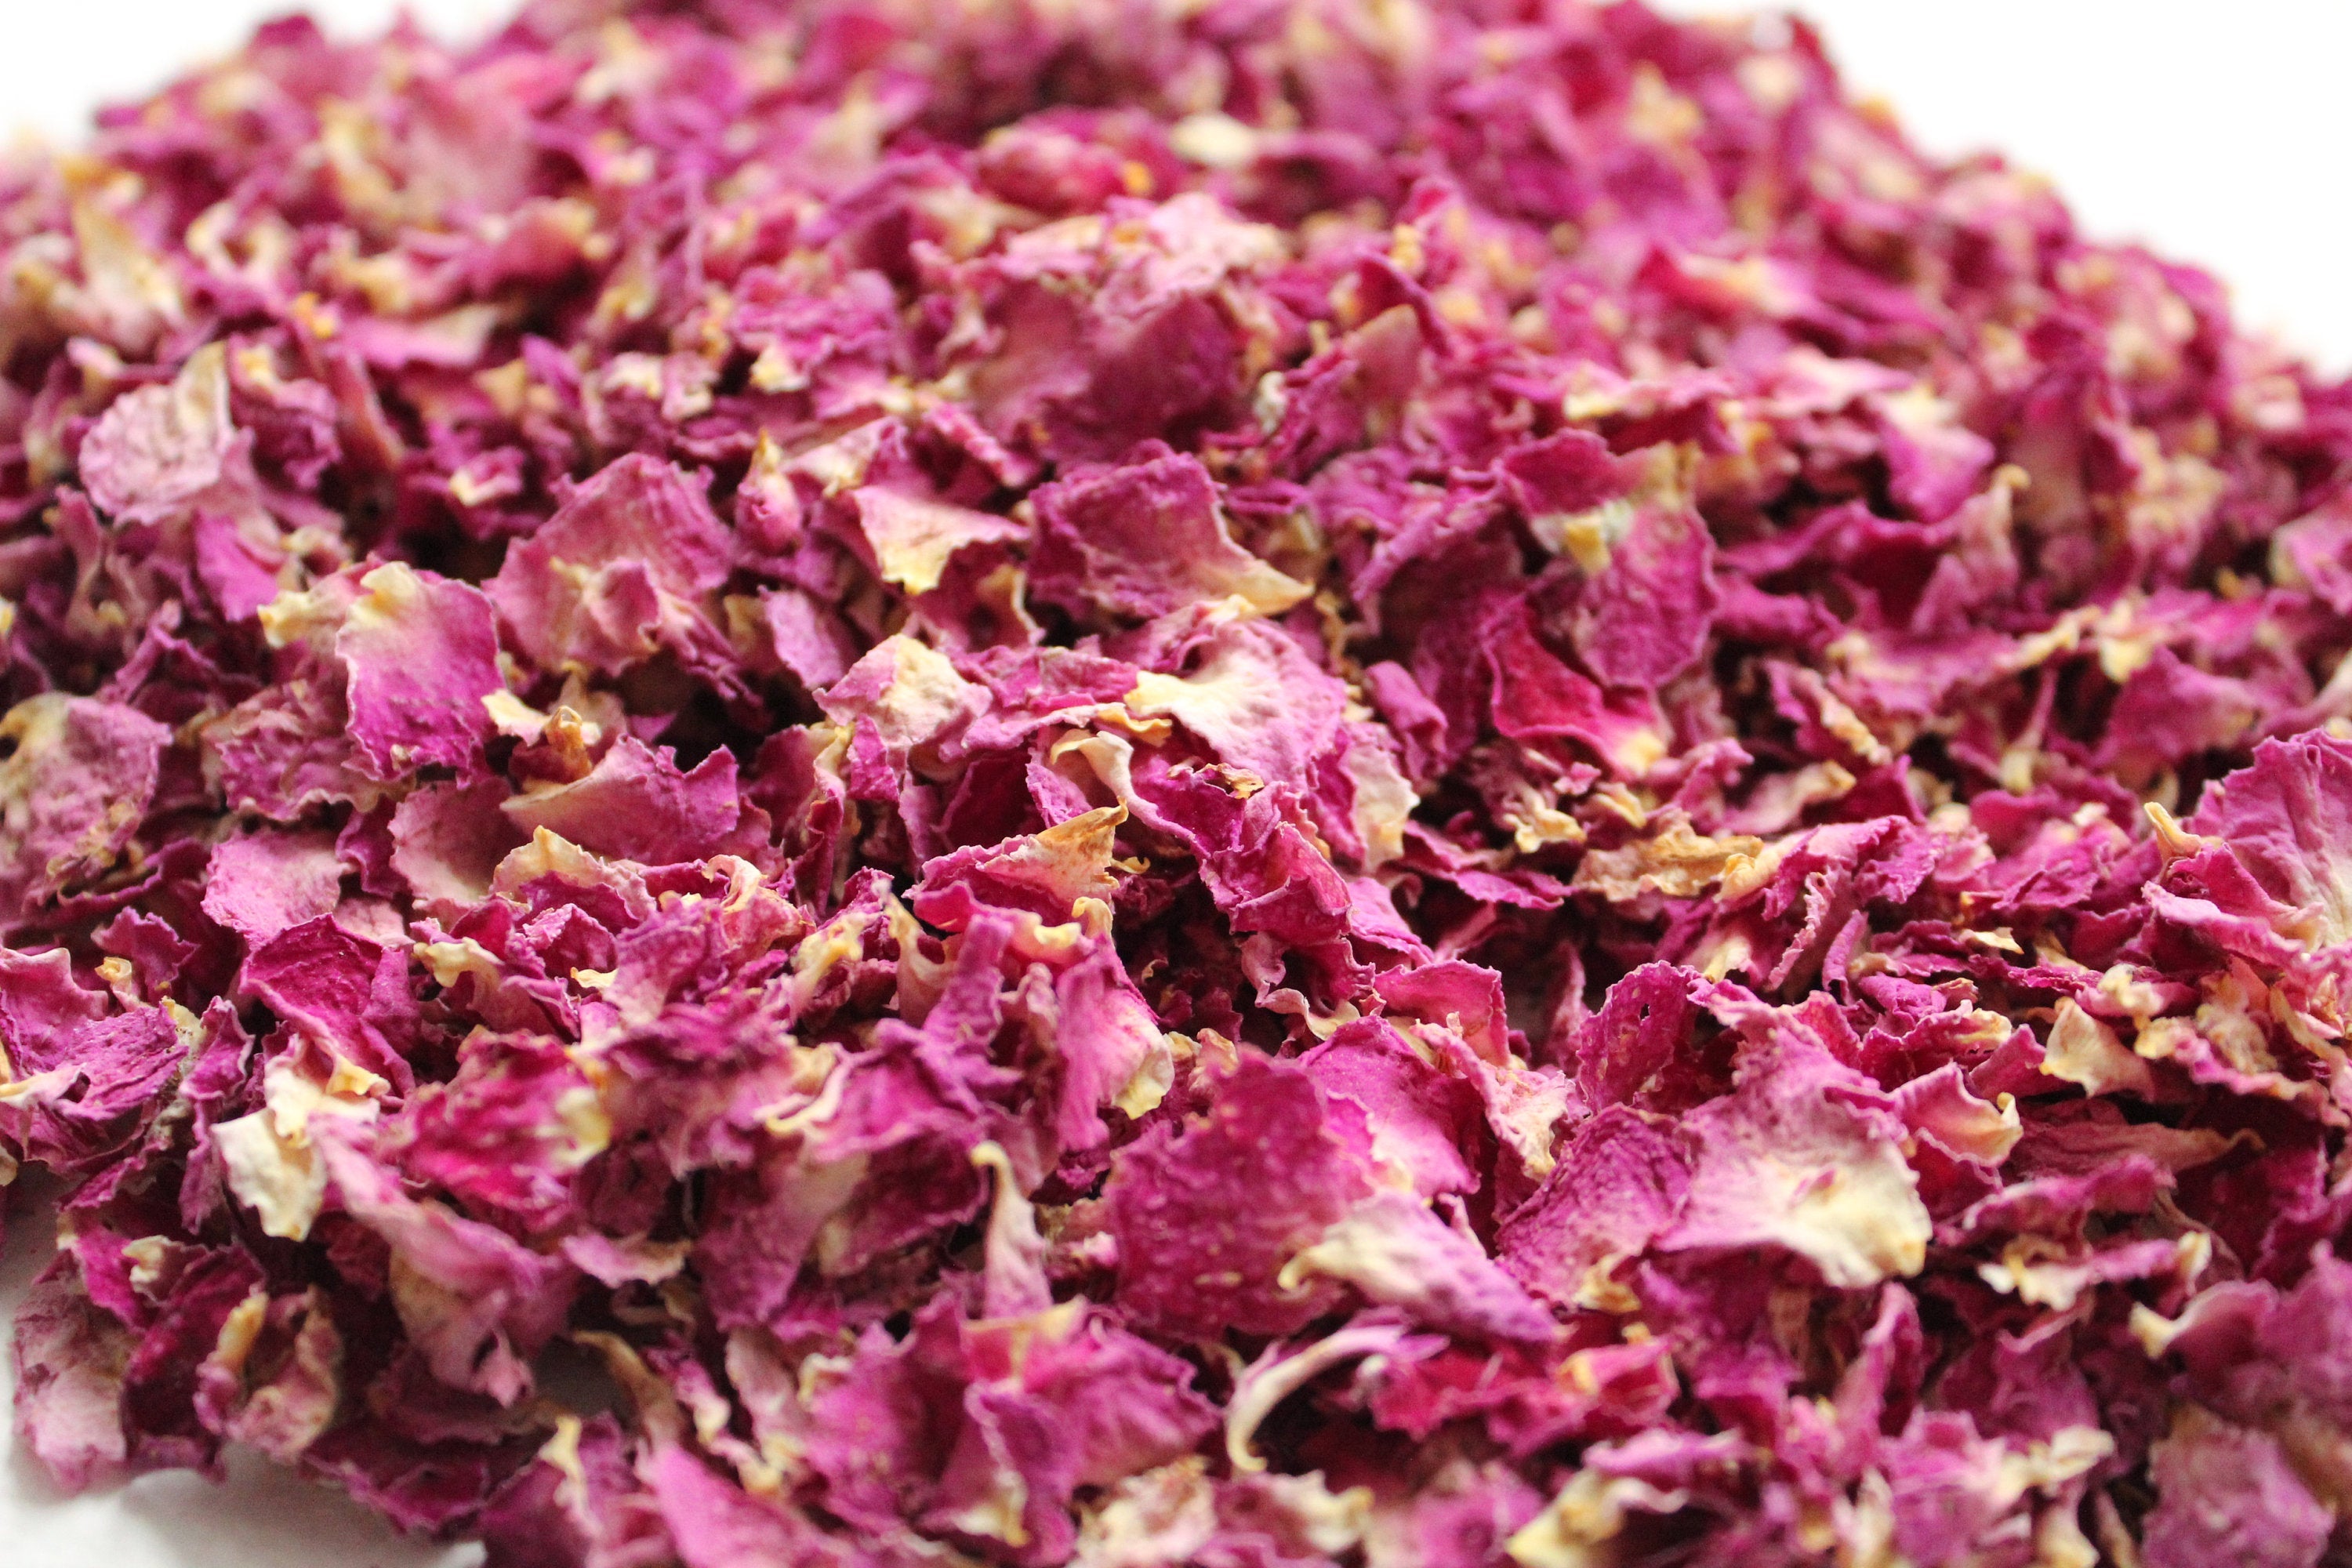 6+ types of Dried Rose Petals, Petals confetti, Dried petals, Organic, Biodegraddable, Wedding, Craft, Confetti, Red rose, White rose